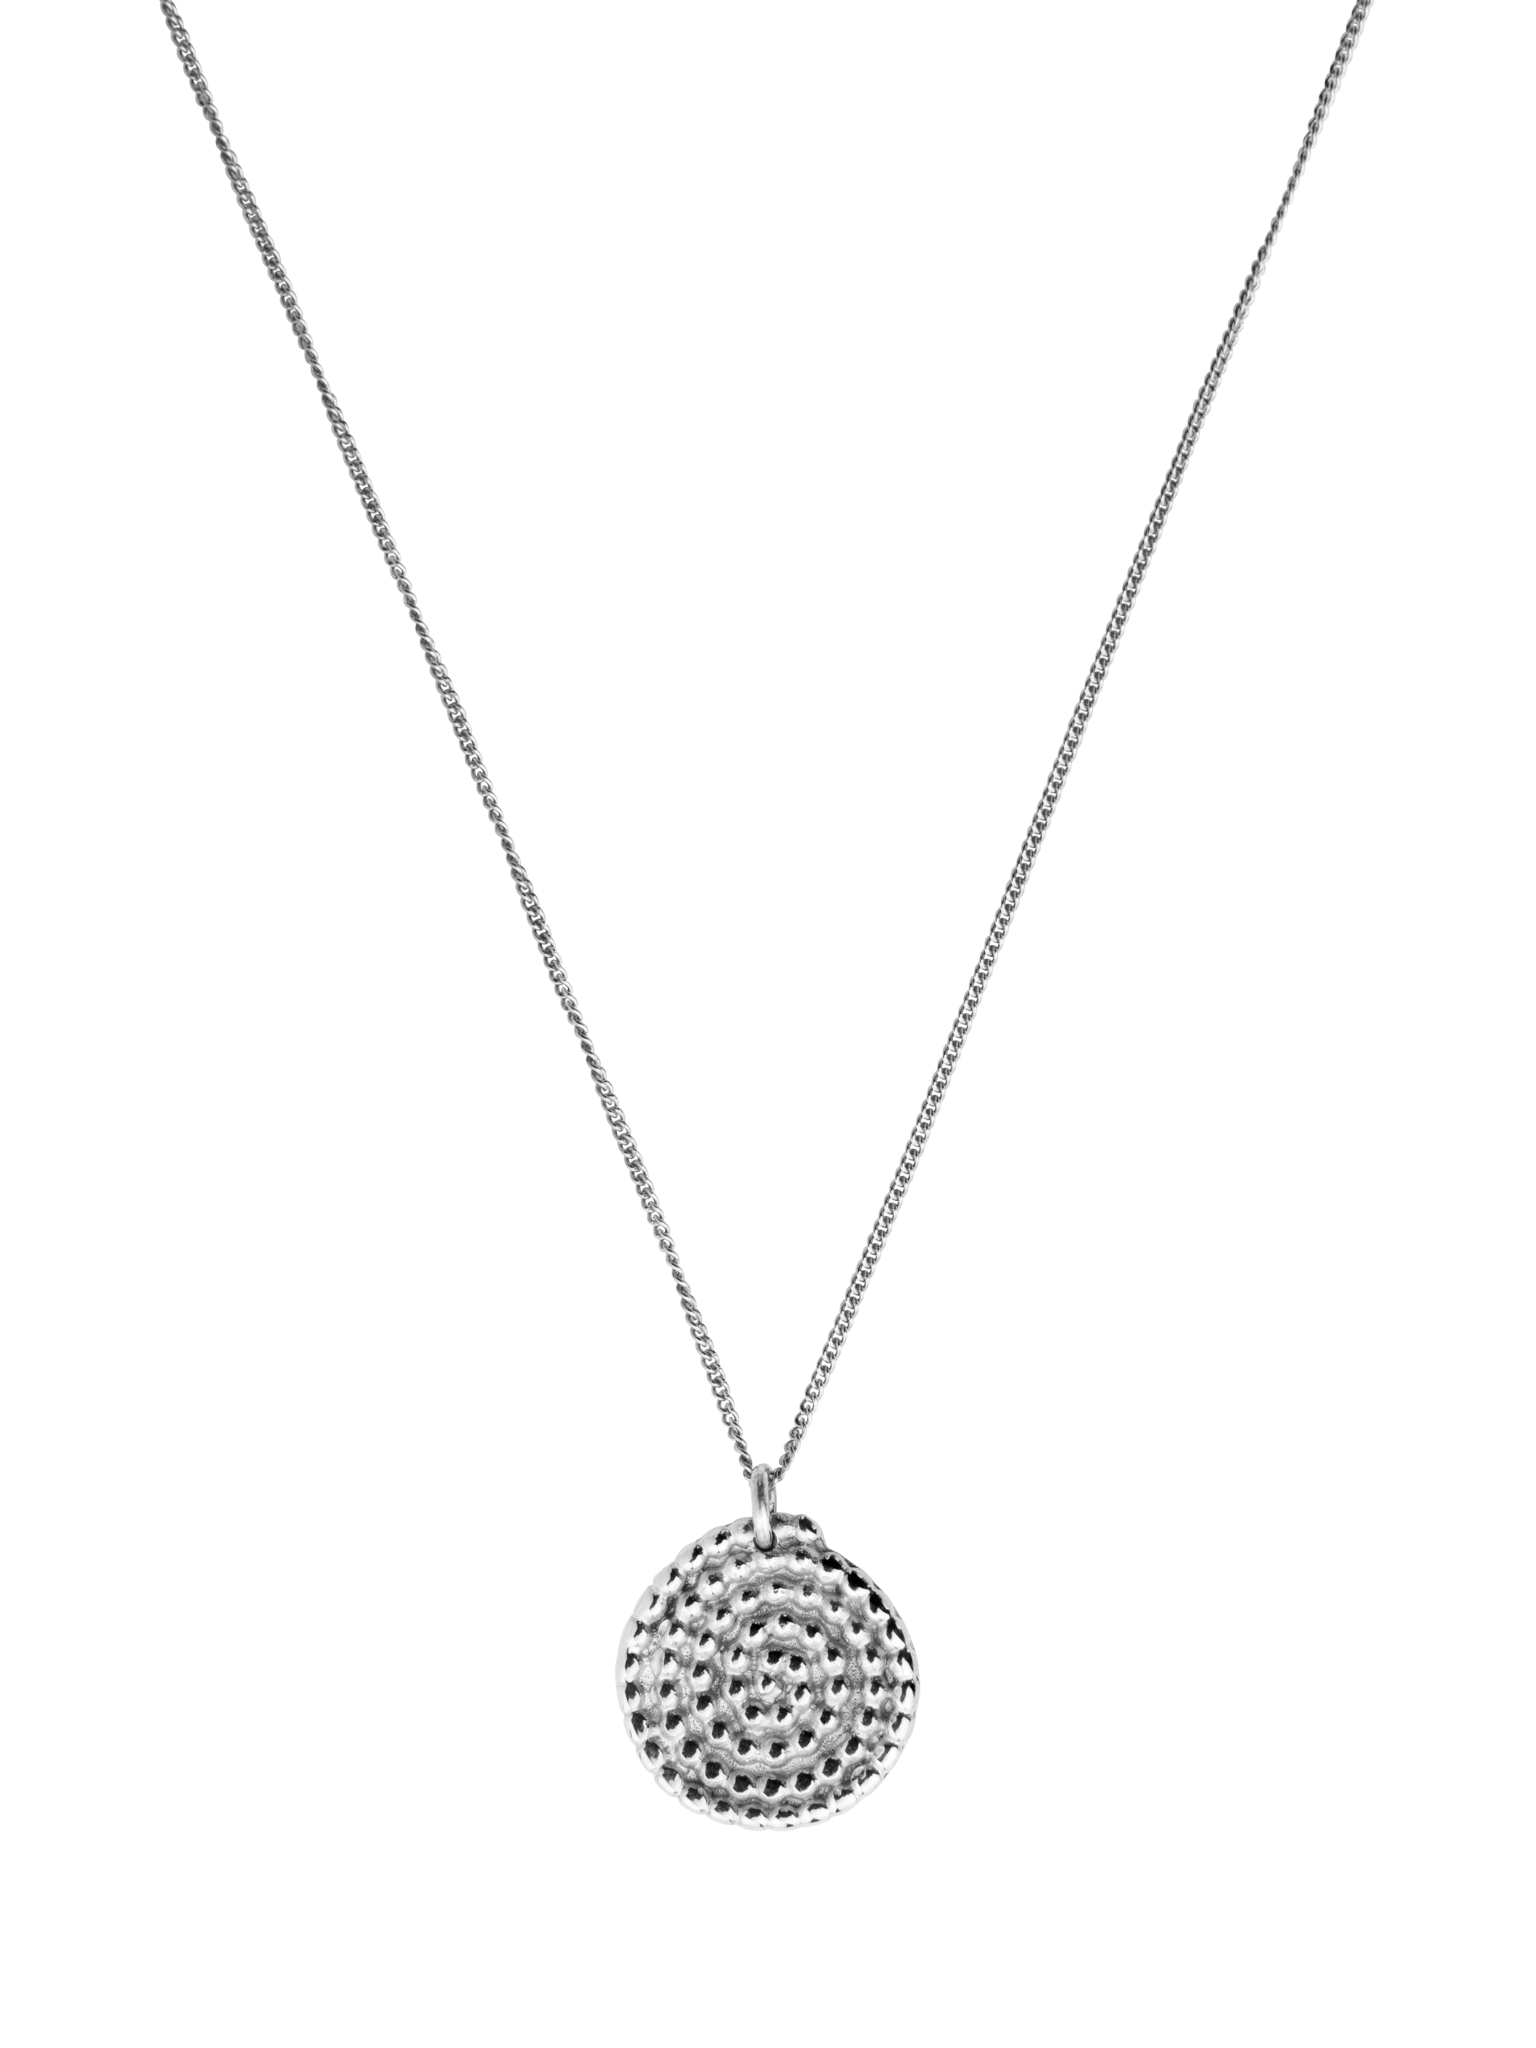 Granulated small spiral pendant necklace